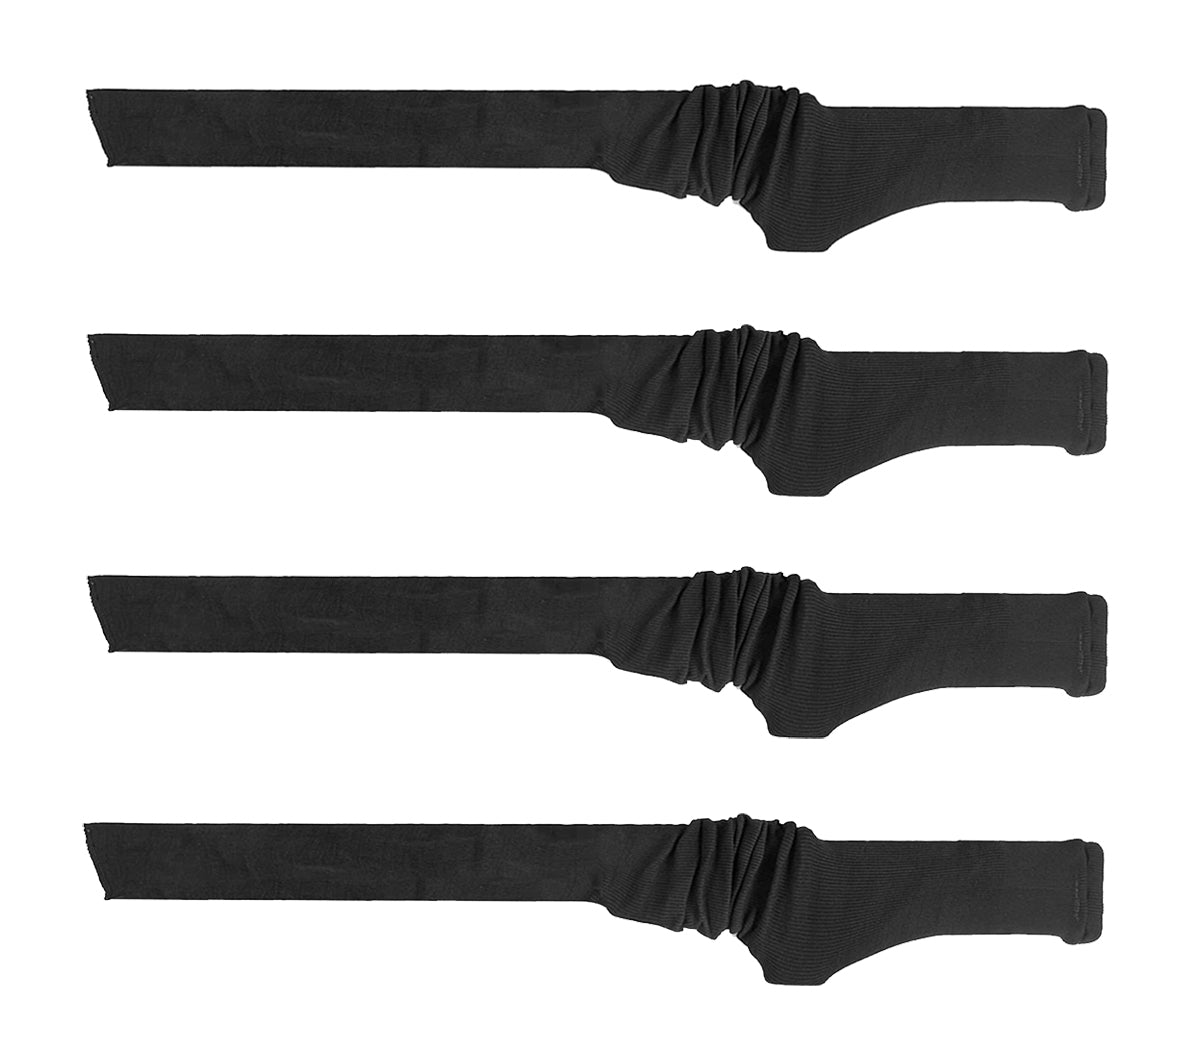 Gun Sock Silicone Treated Knit Gun Socks for Rifles and Shotguns, 54 x 4 Inches Elastic Design of Rifle Sock Sleeve, 4Pcs Fits Tactical Gun and Rifle with Scopes